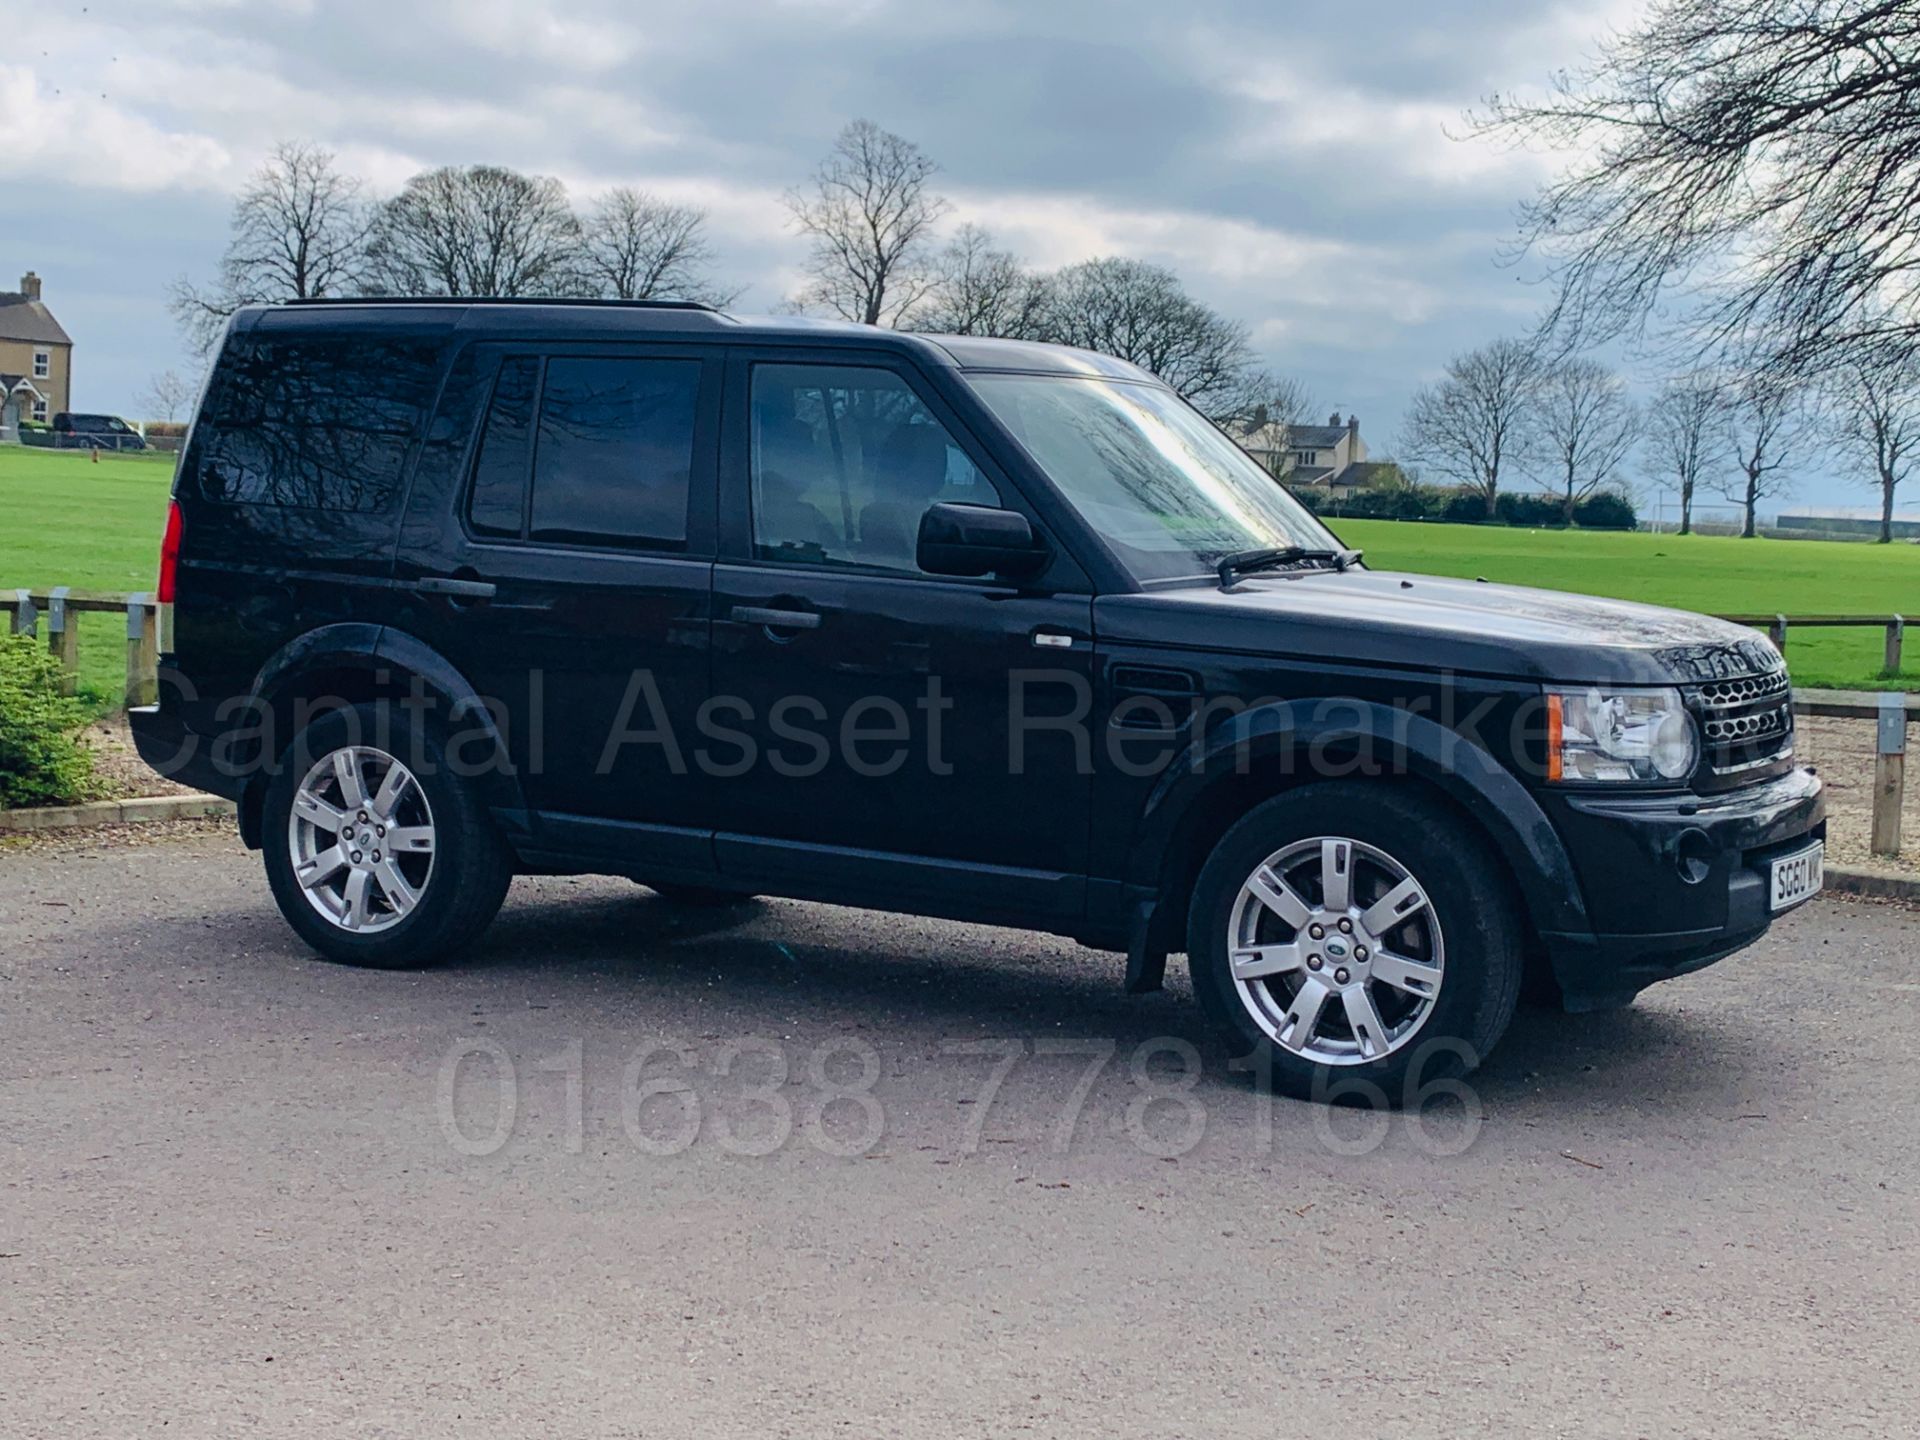 LAND ROVER DISCOVERY 4 **XS EDITION** (2011 MODEL) '3.0 TDV6 - 245 BHP - AUTO' *7 SEATER* (NO VAT) - Image 12 of 55